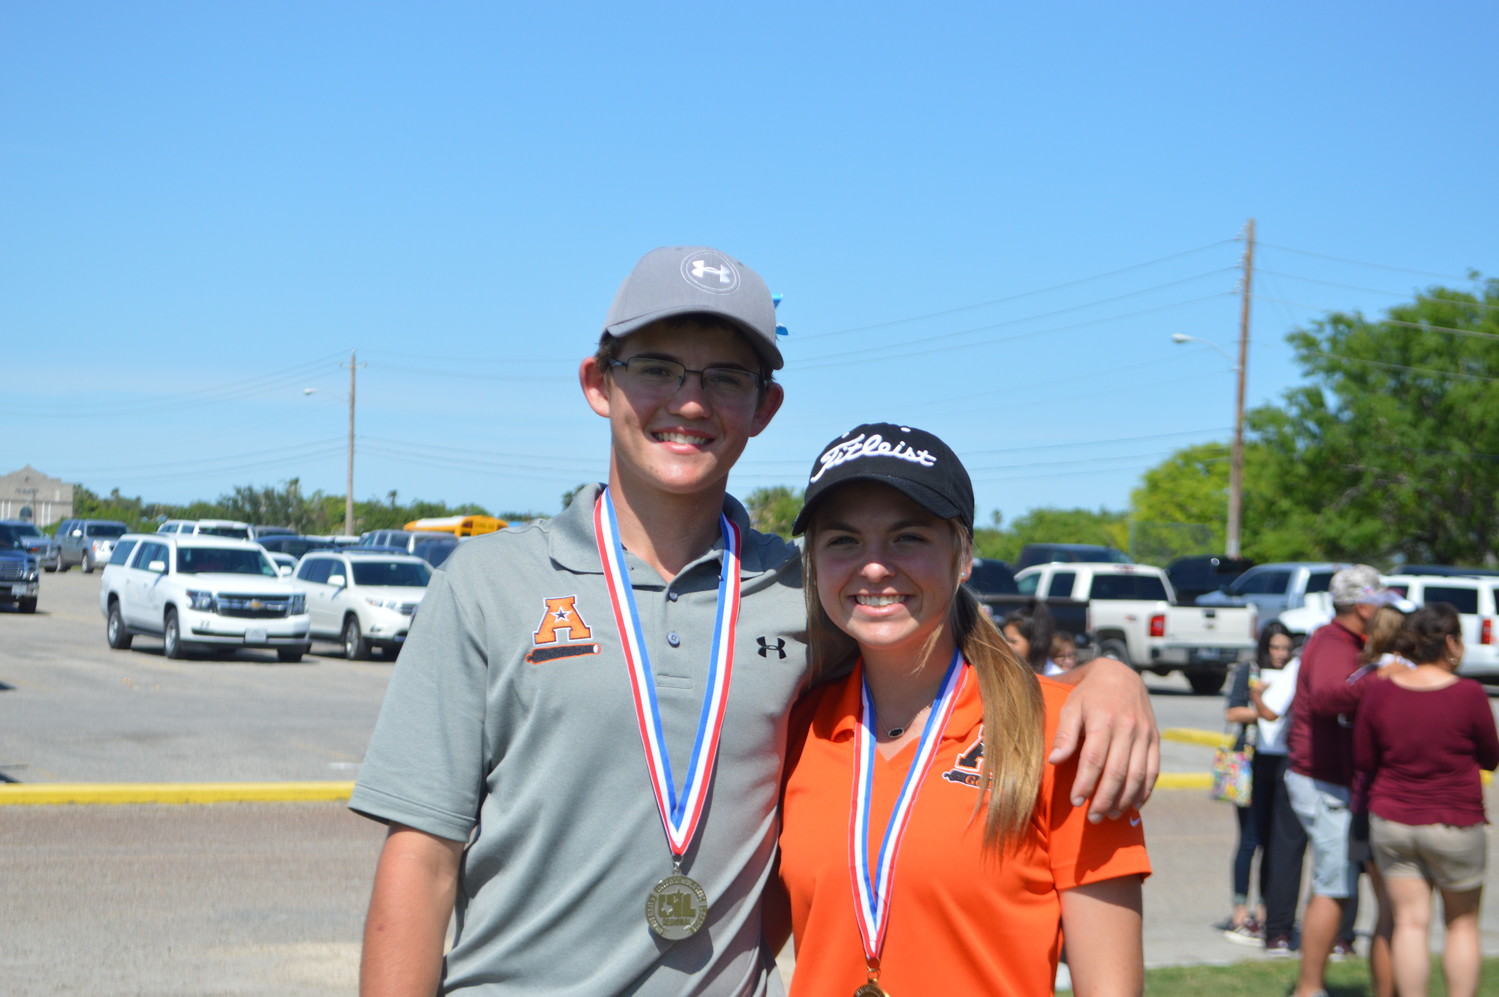 Mason Richter (left) finished middle of the pack in the boys golf state meet earlier this week. Kiley Allen (right) will take on the girls golf state meet this upcoming Monday and Tuesday. Allen’s trip to Marble Falls will be her first as a state-qualified competitor.